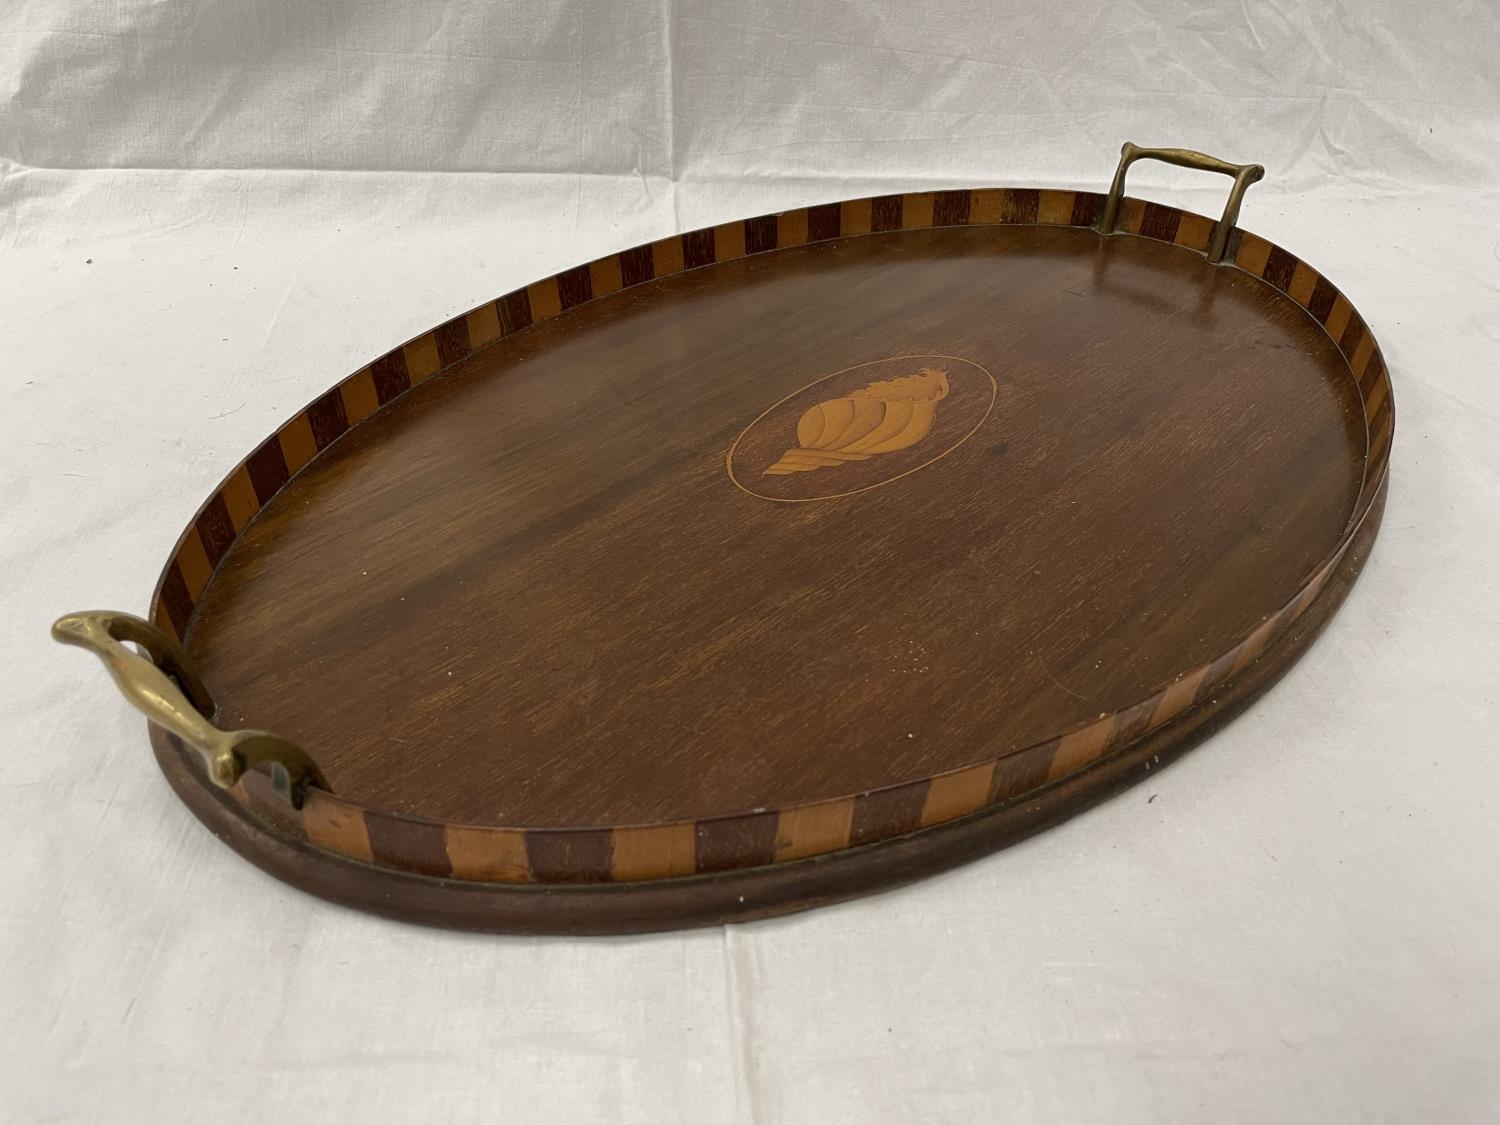 A LARGE MAHOGANY TRAY WITH BRASS HANDLES AND A SHELL DESIGN 57CM X 37CM - Image 3 of 3